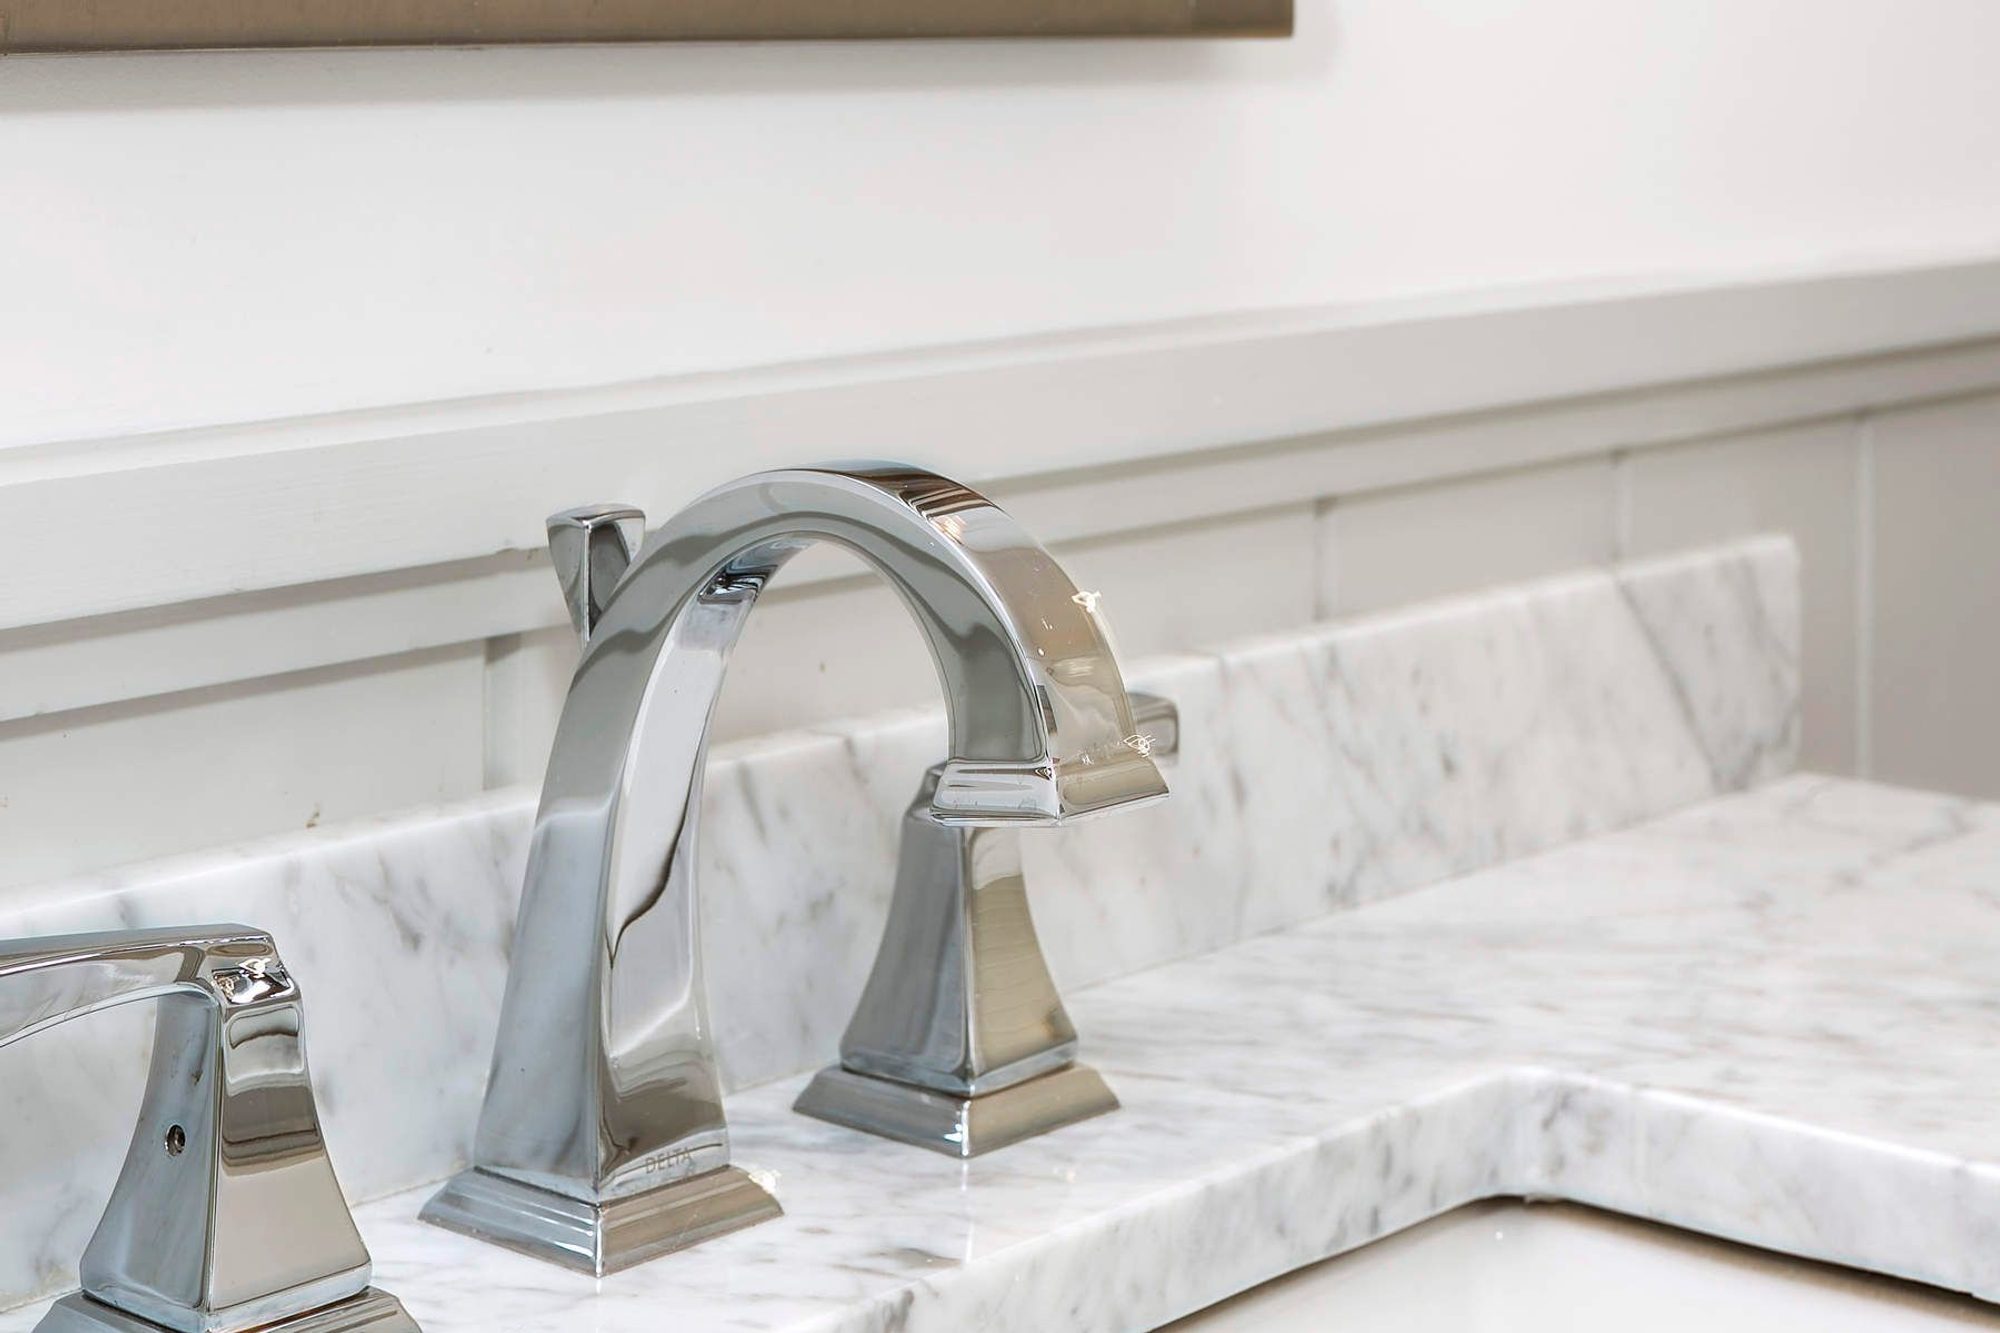 Closeup of a Delta chrome bathroom faucet with marble counter.